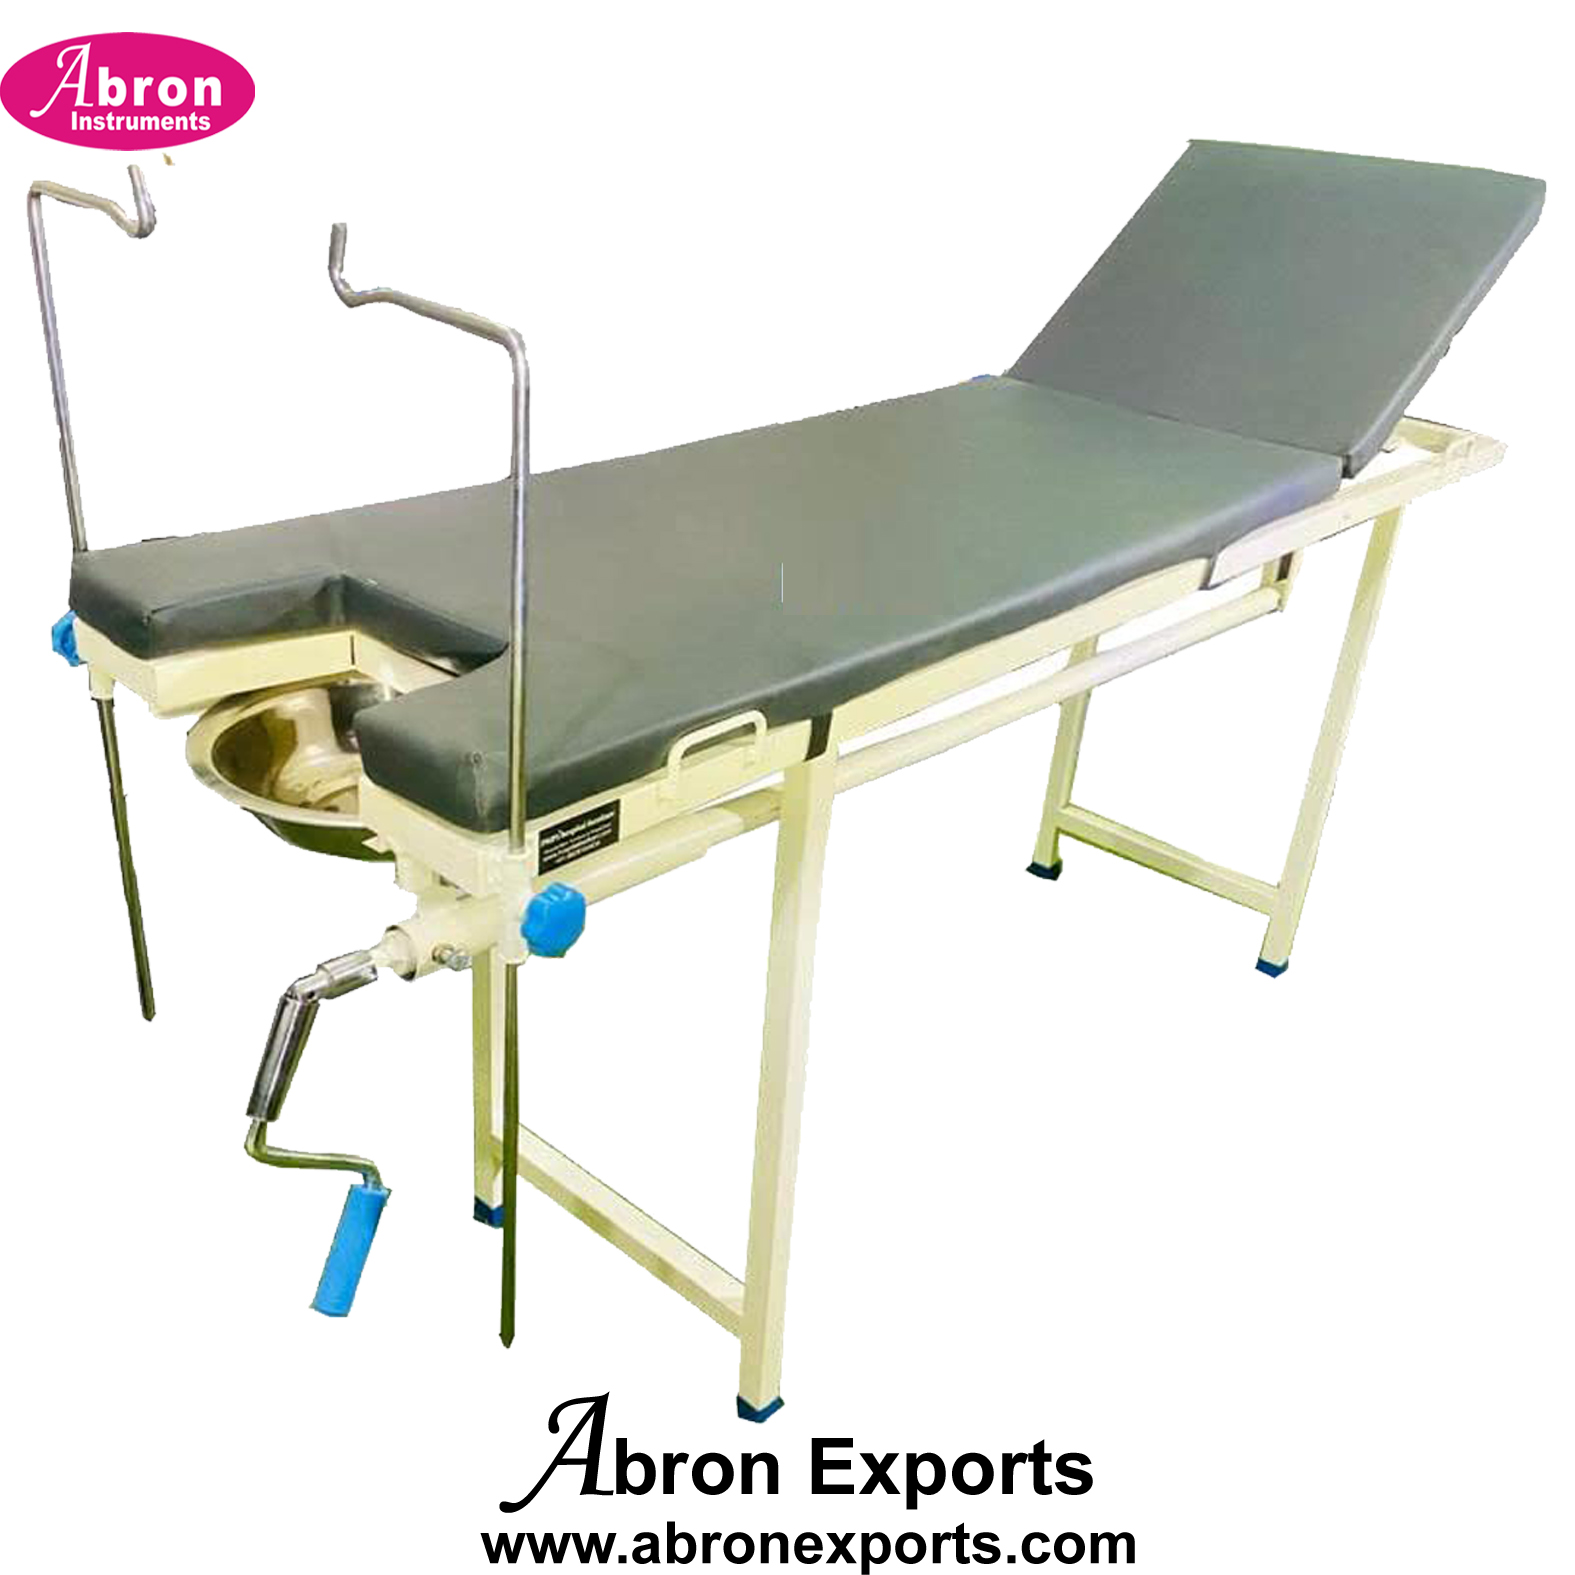 Gynecological Delivery Examination Table Bed Labour and Delivery legs bars support and matters Abron ABM-2714GYEX 